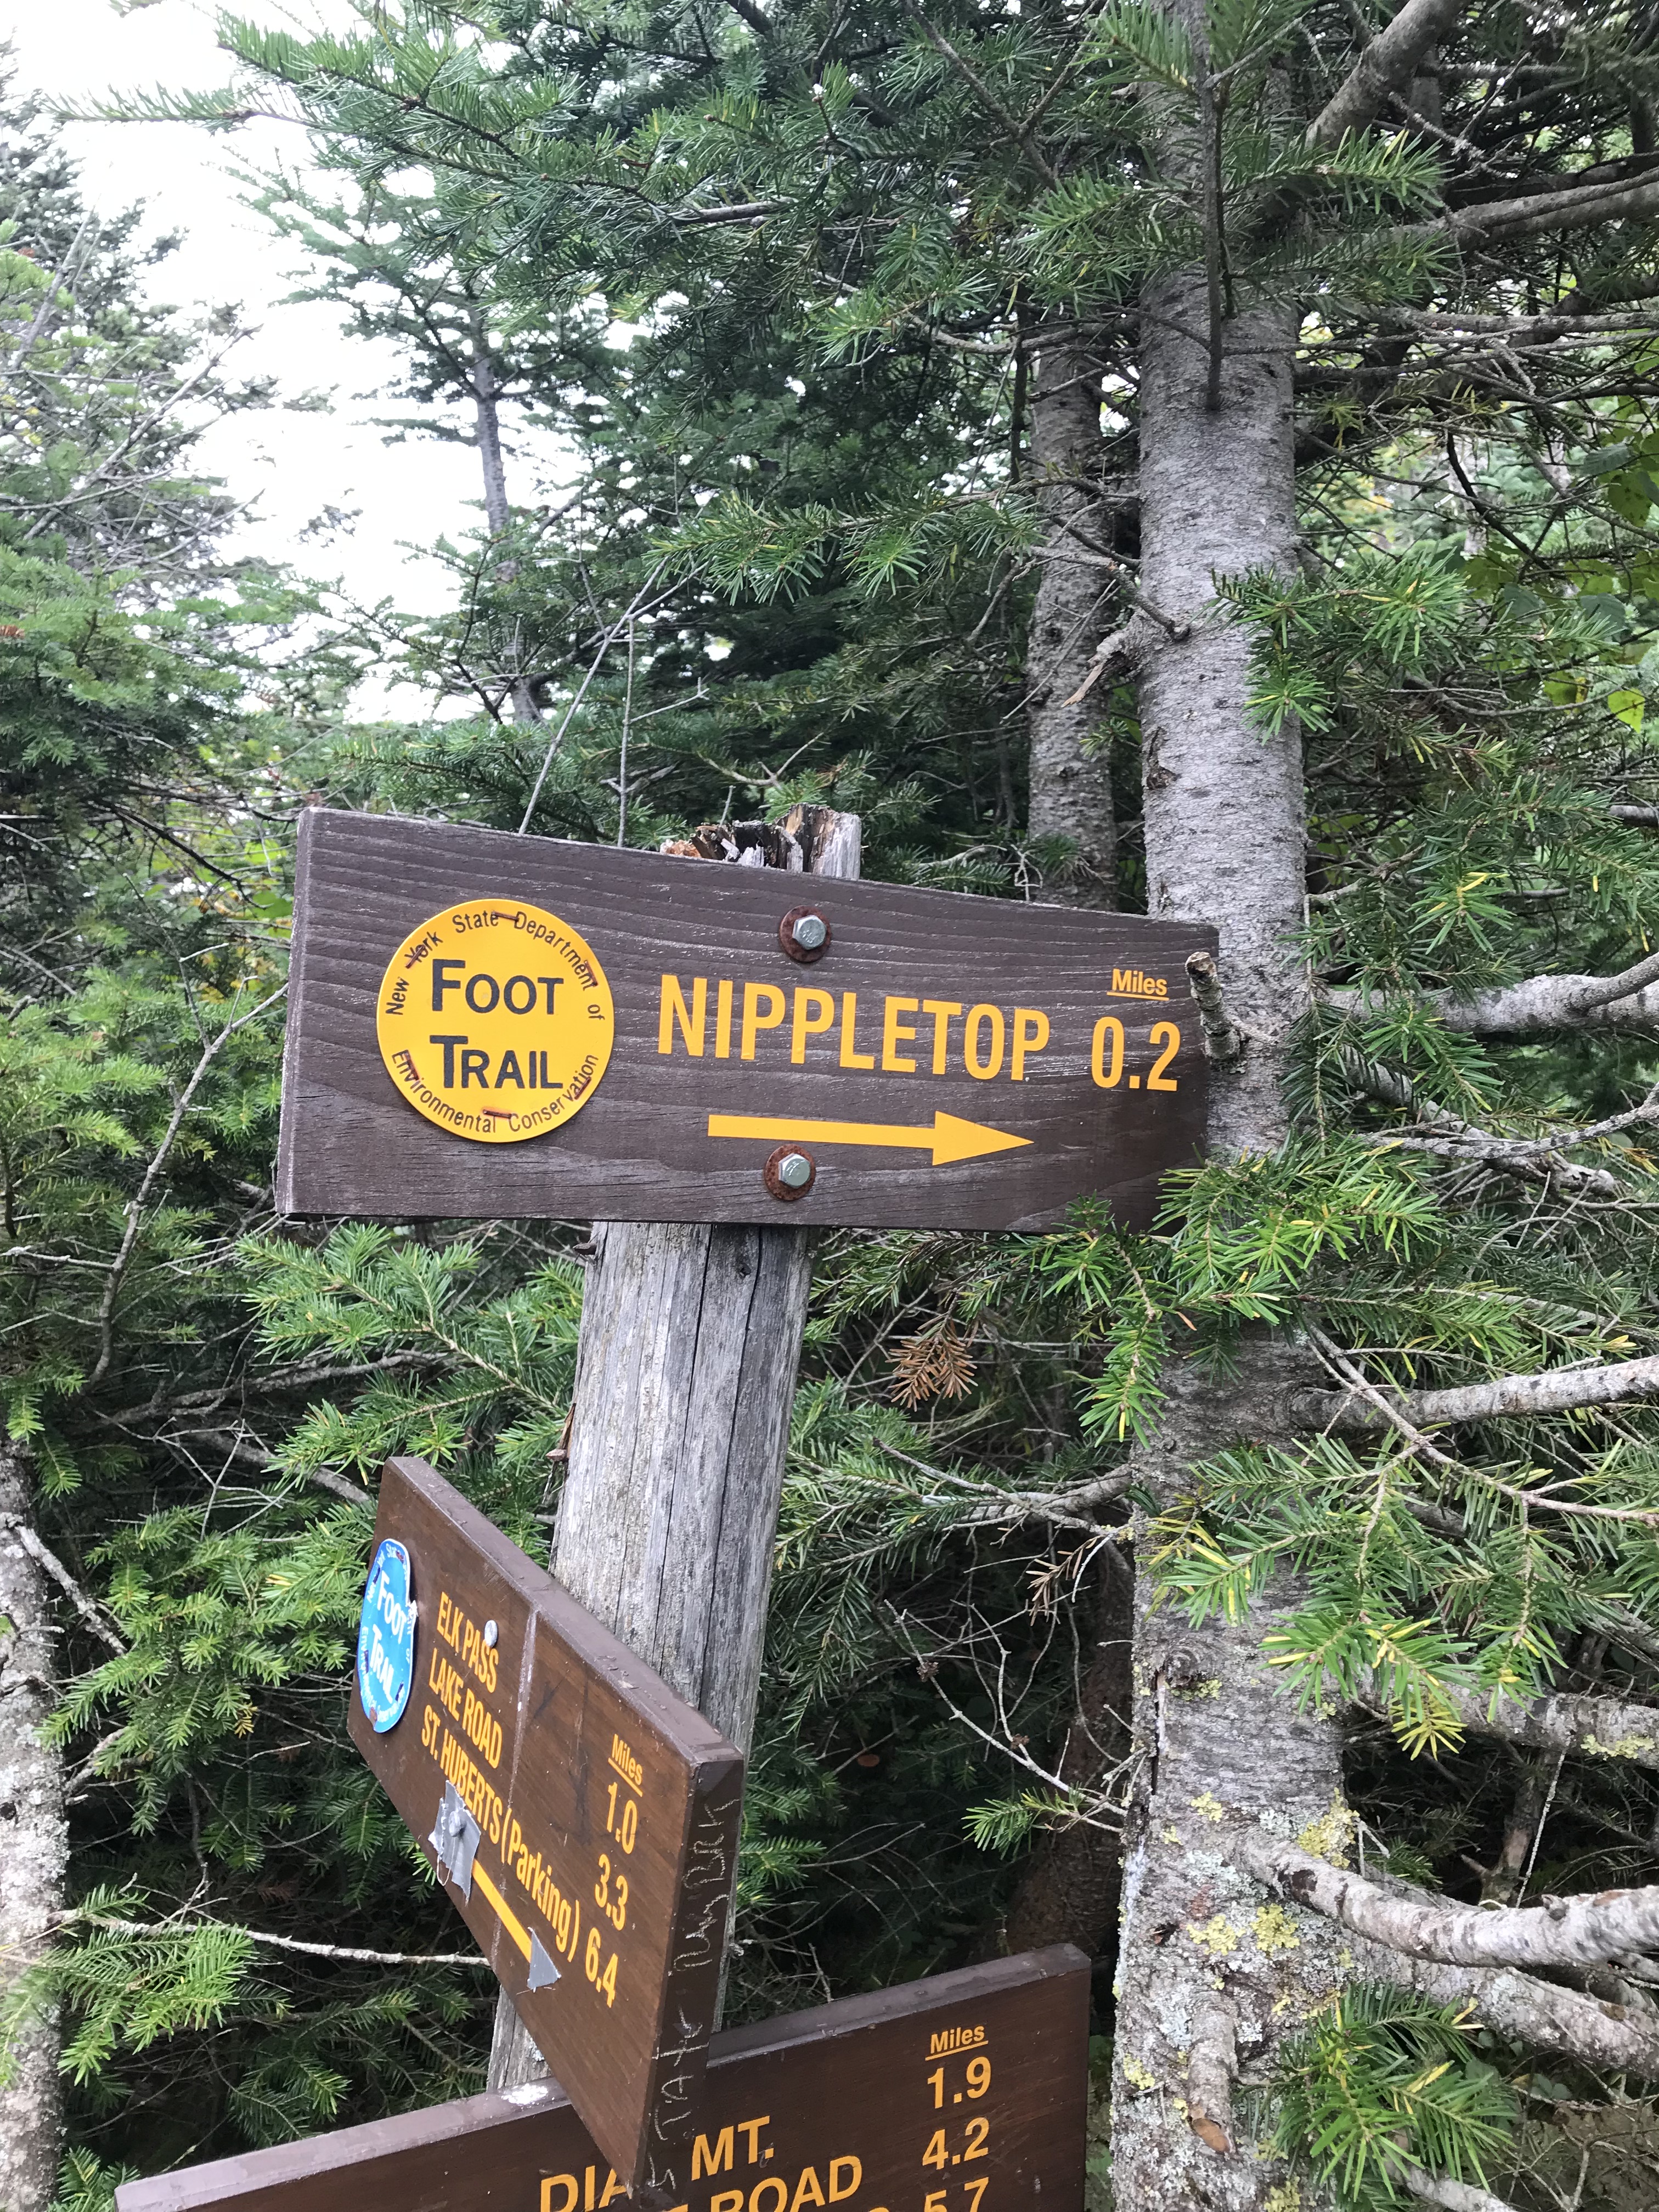 Sign .2 miles to Nippletop